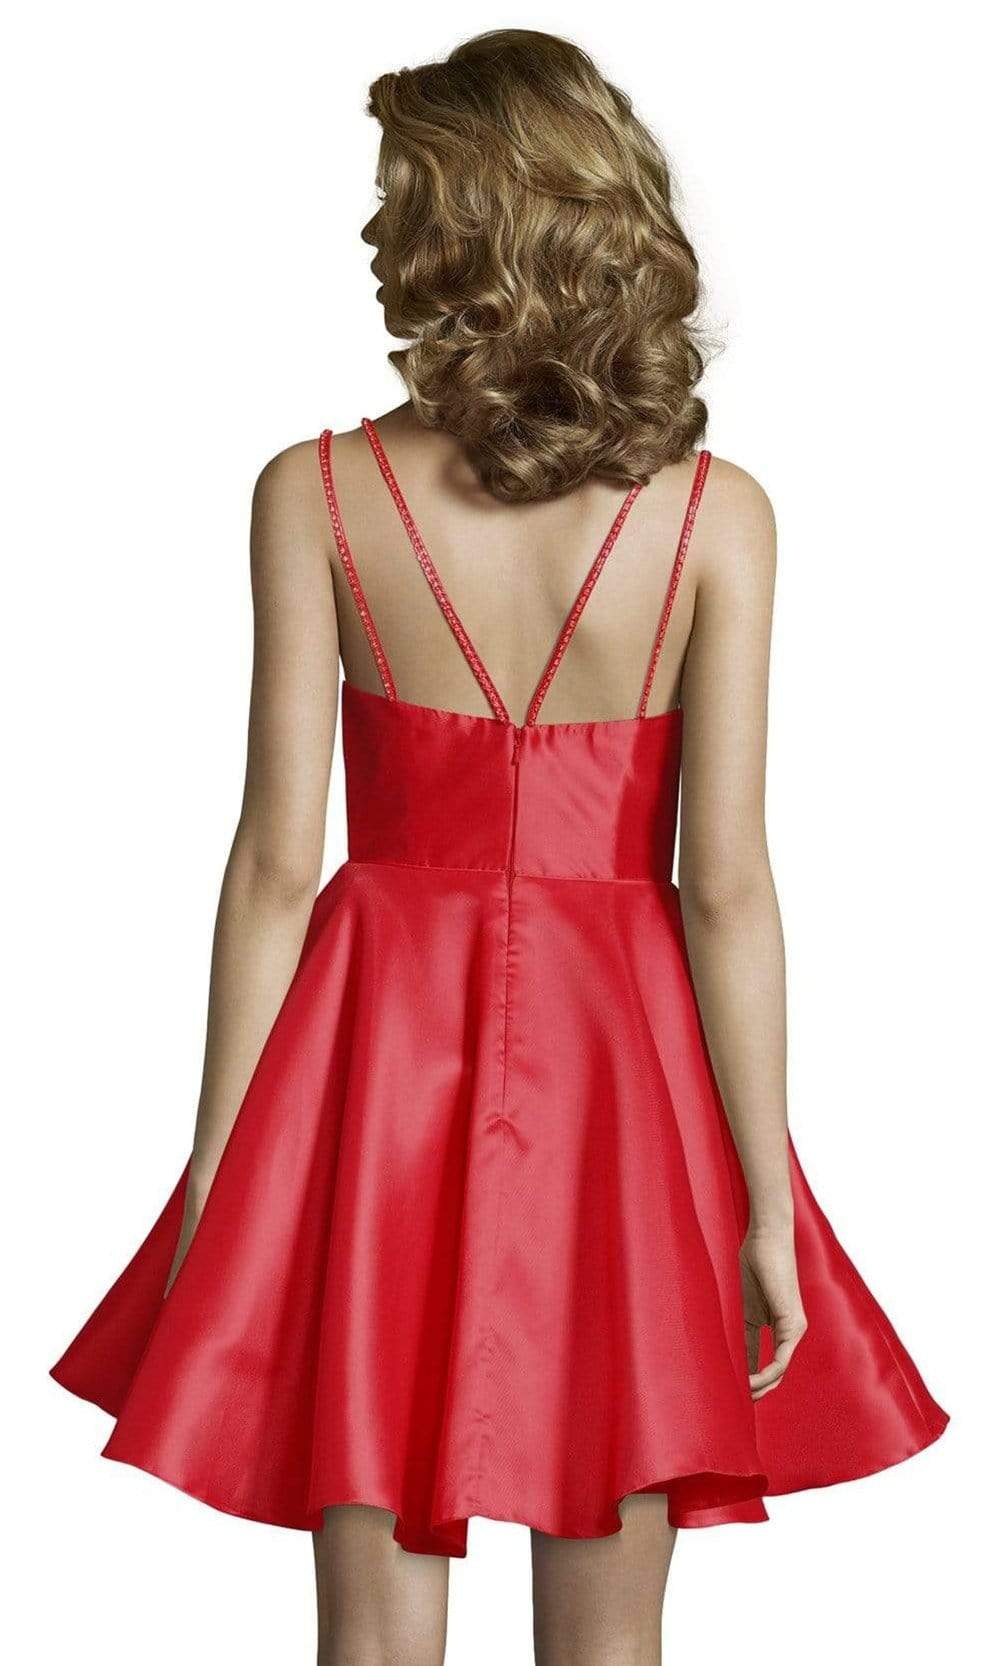 Alyce Paris - 3769 Beaded Straps Fit and Flare Cocktail Dress Homecoming Dresses